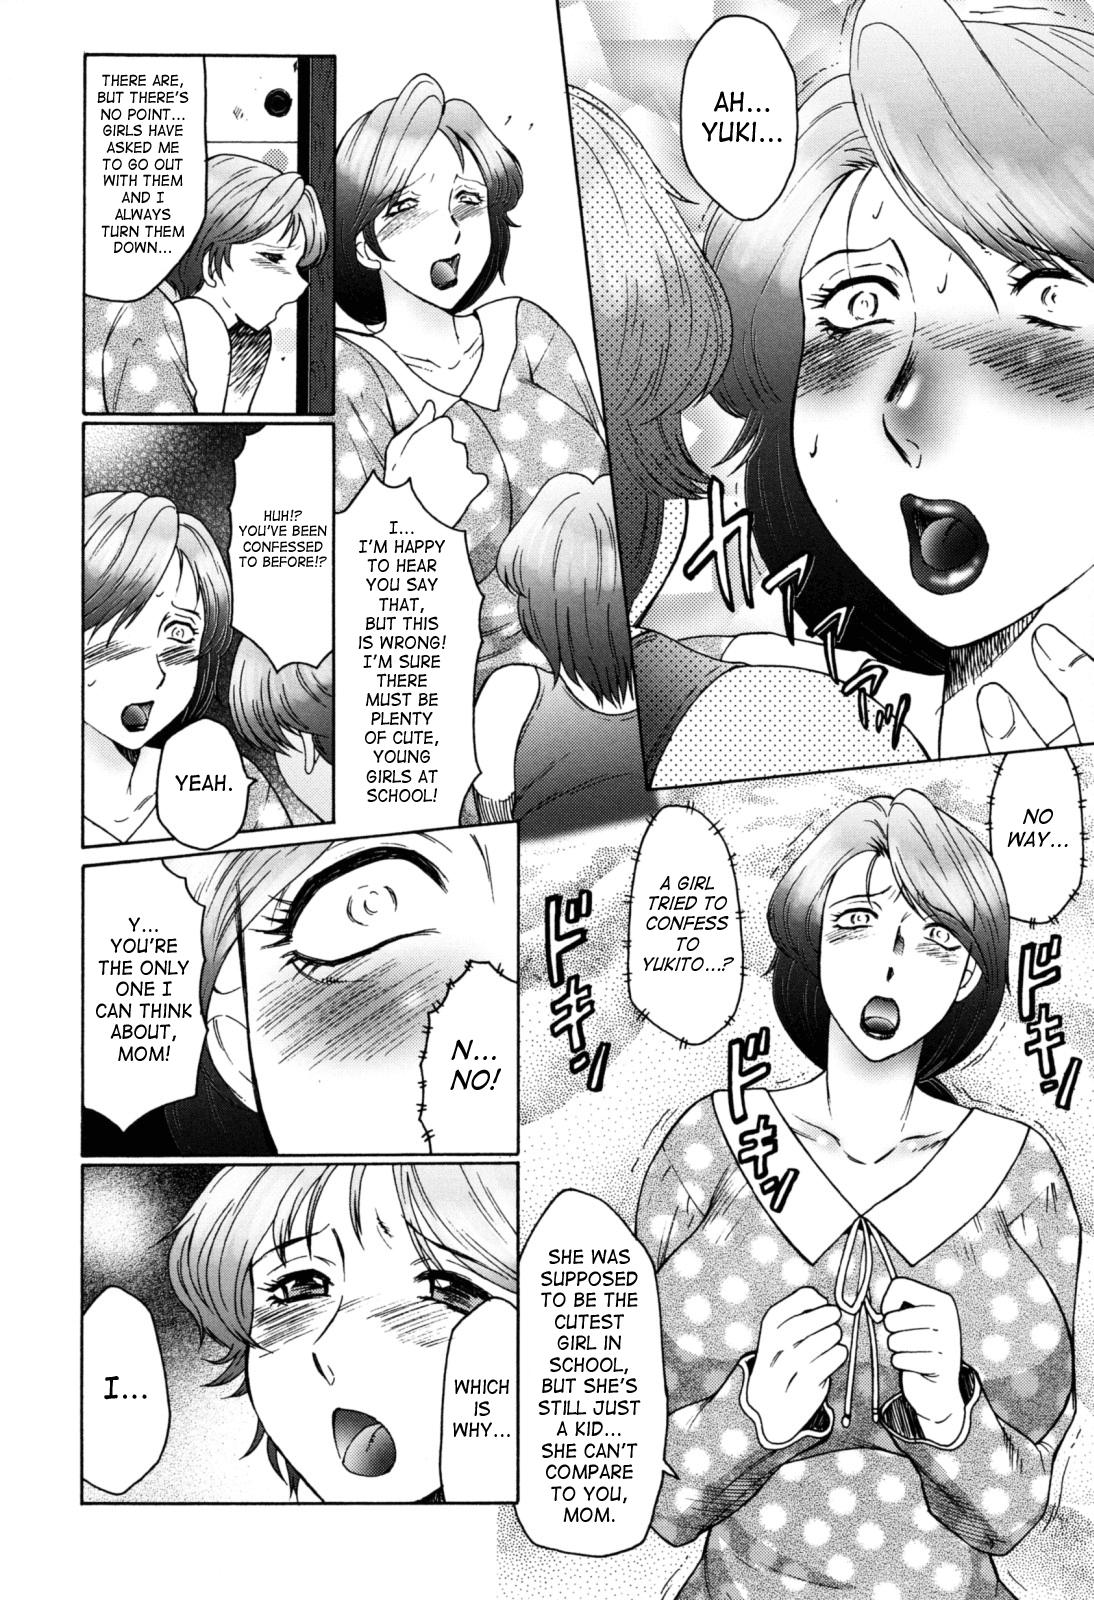 [Fuusen Club] Boshino Toriko - The Captive of Mother and the Son | Enslaved Mother and Son Ch. 1-5 [English] [SaHa] 31